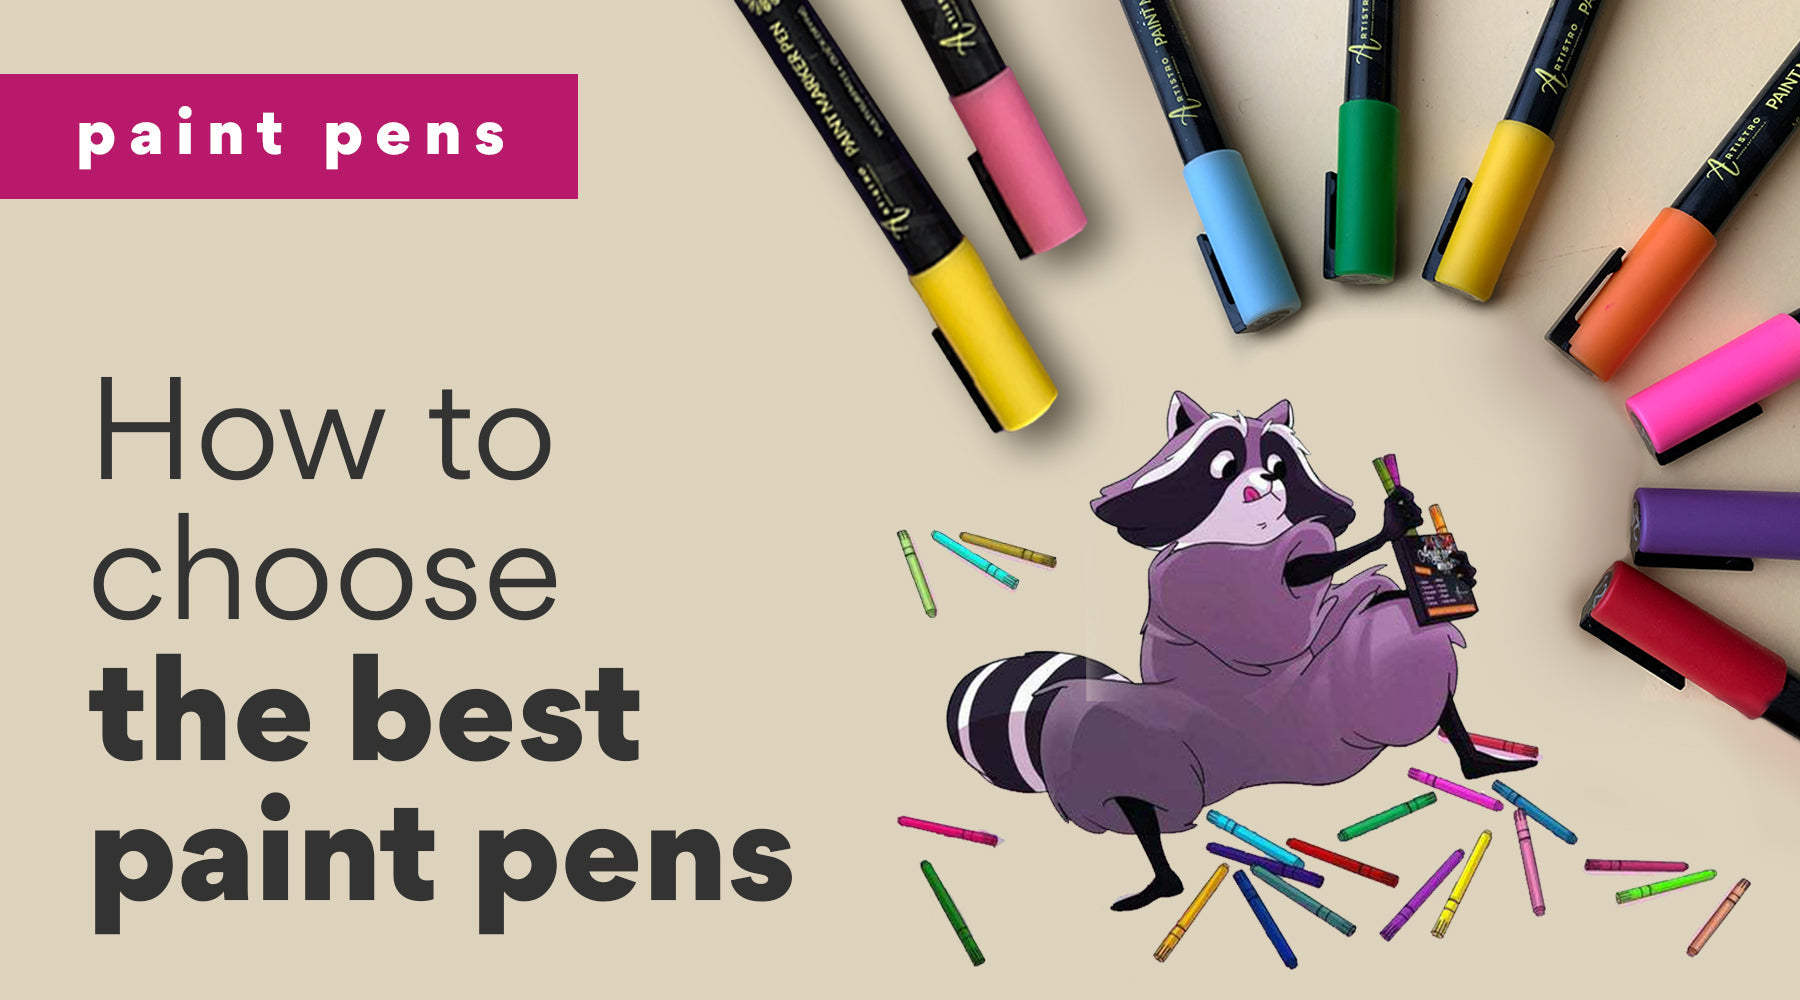 The ultimate guide to pens & markers